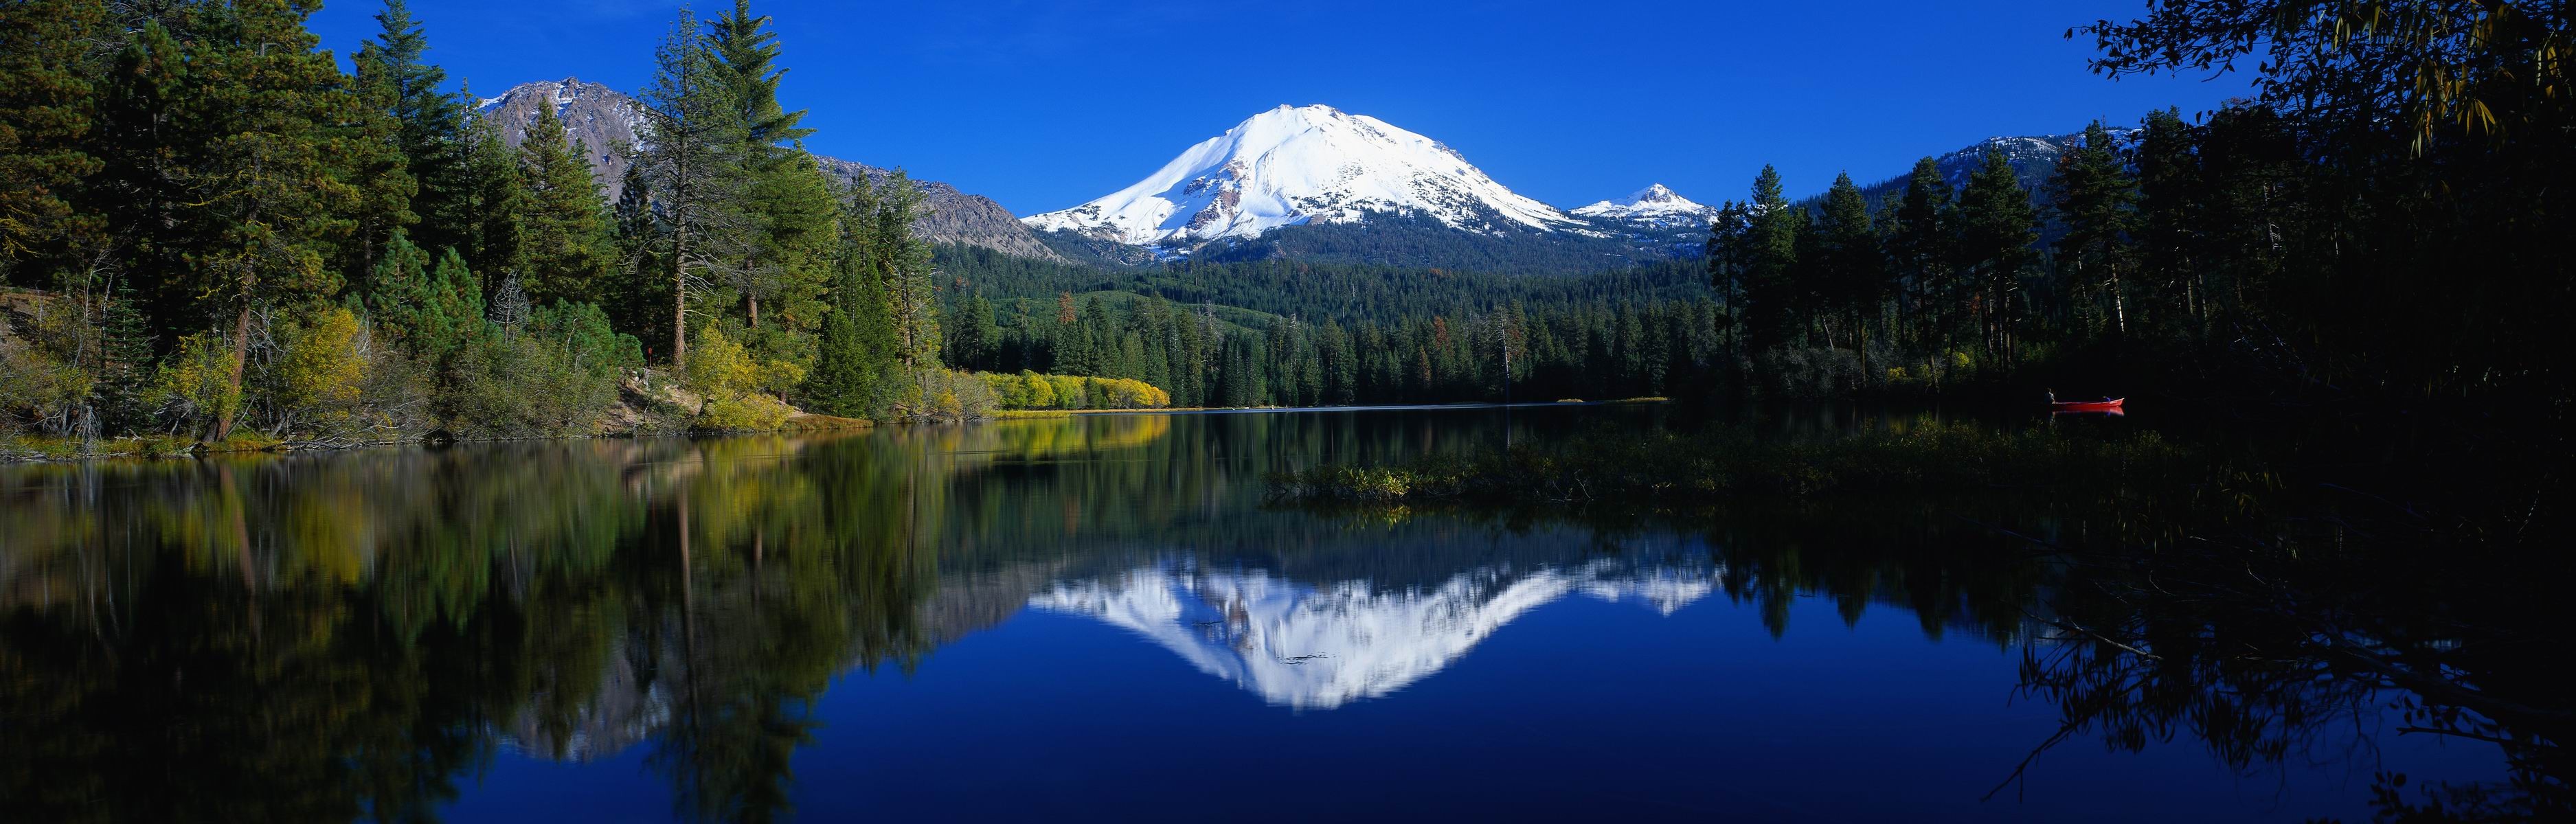 General 3750x1200 landscape lake reflection mountains forest trees nature snowy peak